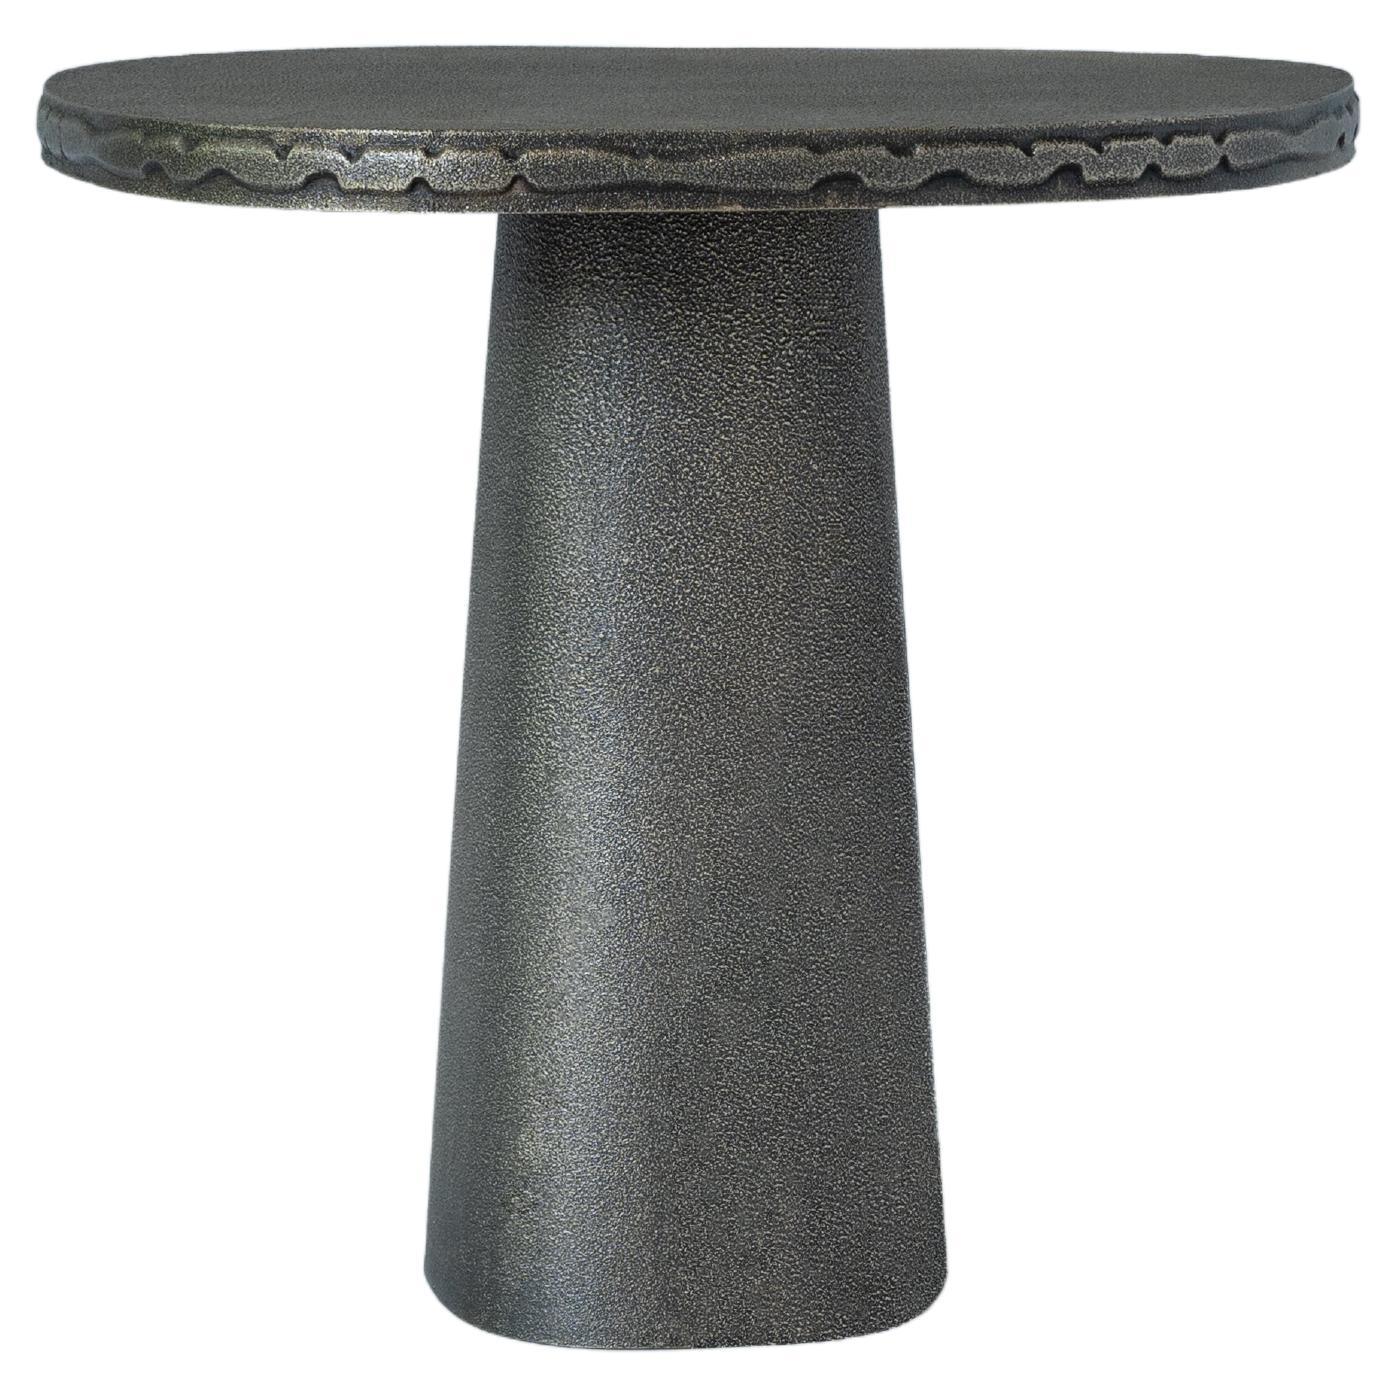 Badal Side Table by DeMuro Das in Solid Antique Bronze